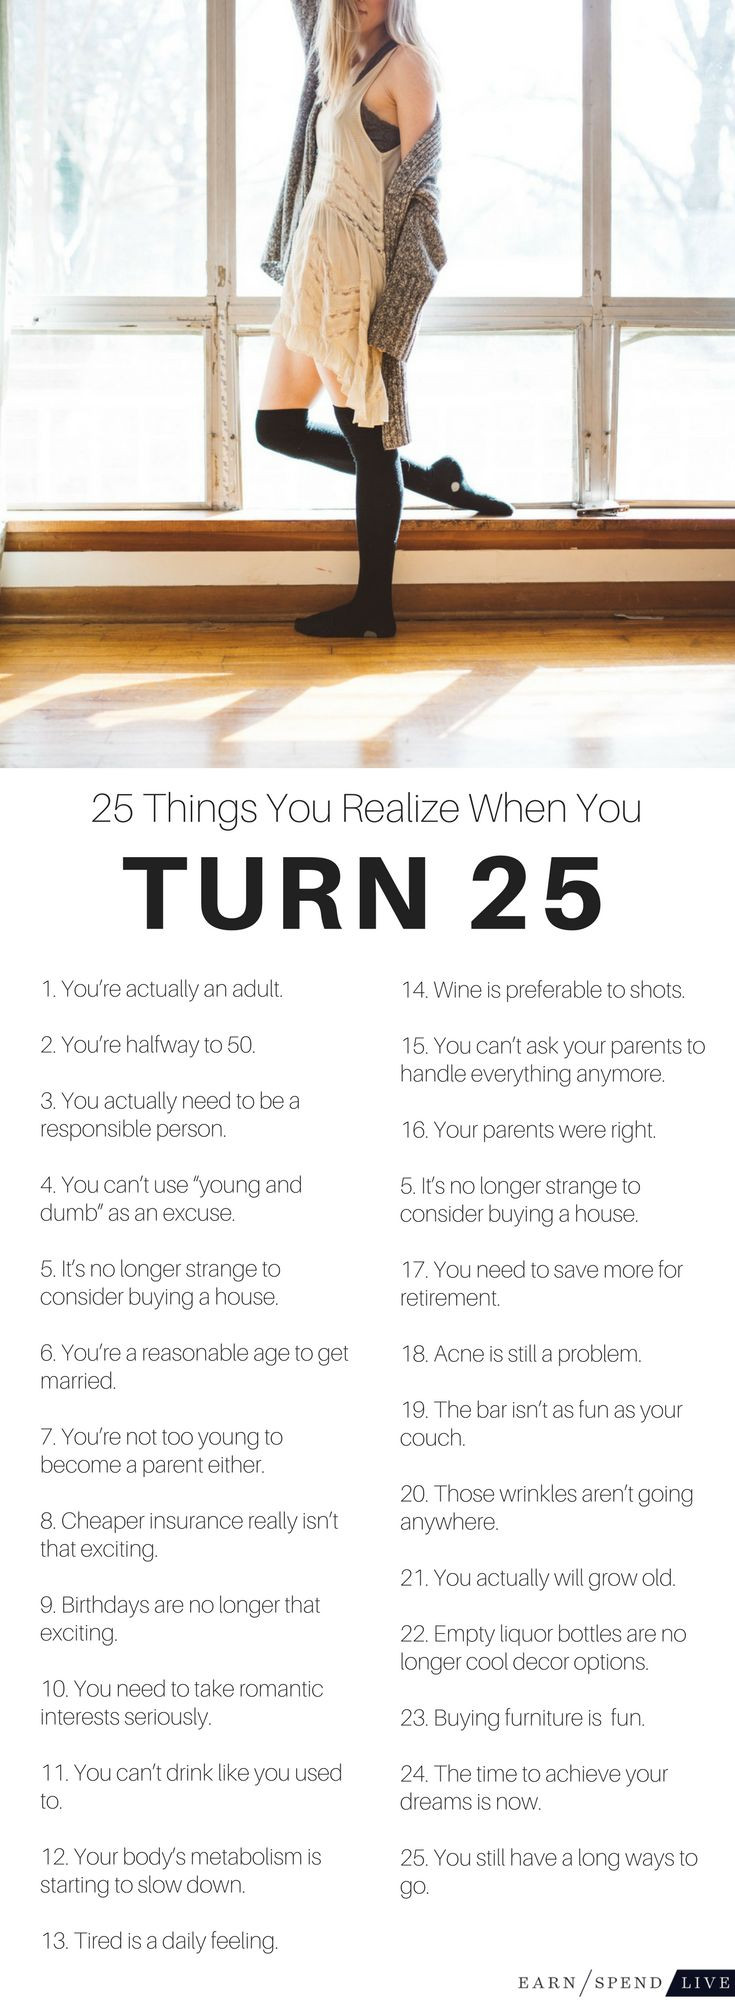 Turning 25 Birthday Quotes
 The 25 best 25th birthday ideas on Pinterest